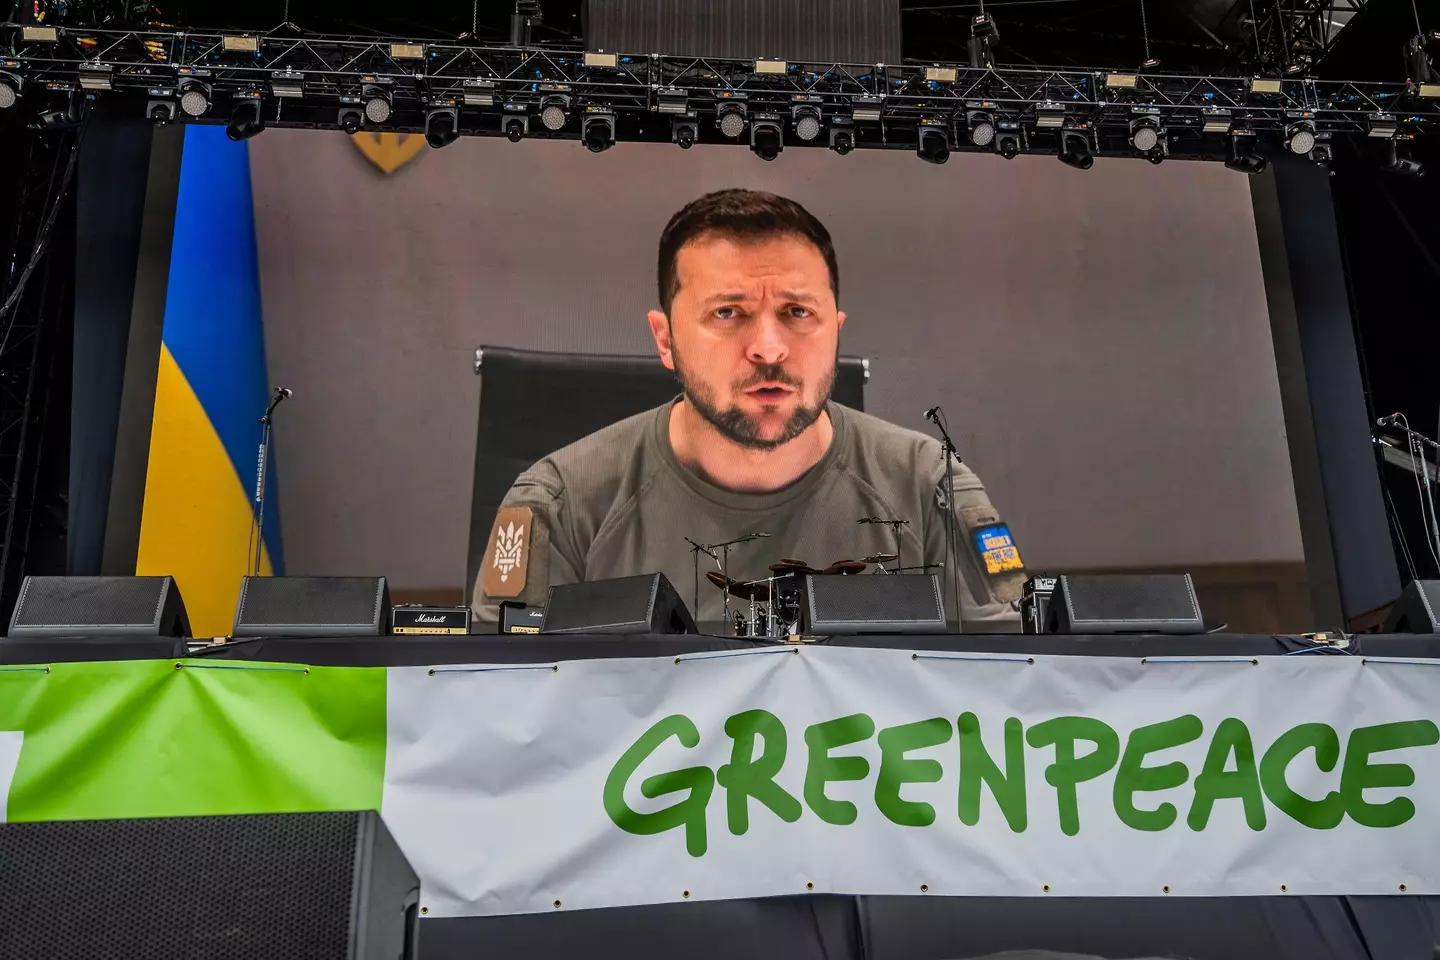 Zelenskyy urged festival goers to 'spread the truth' about the invasion.